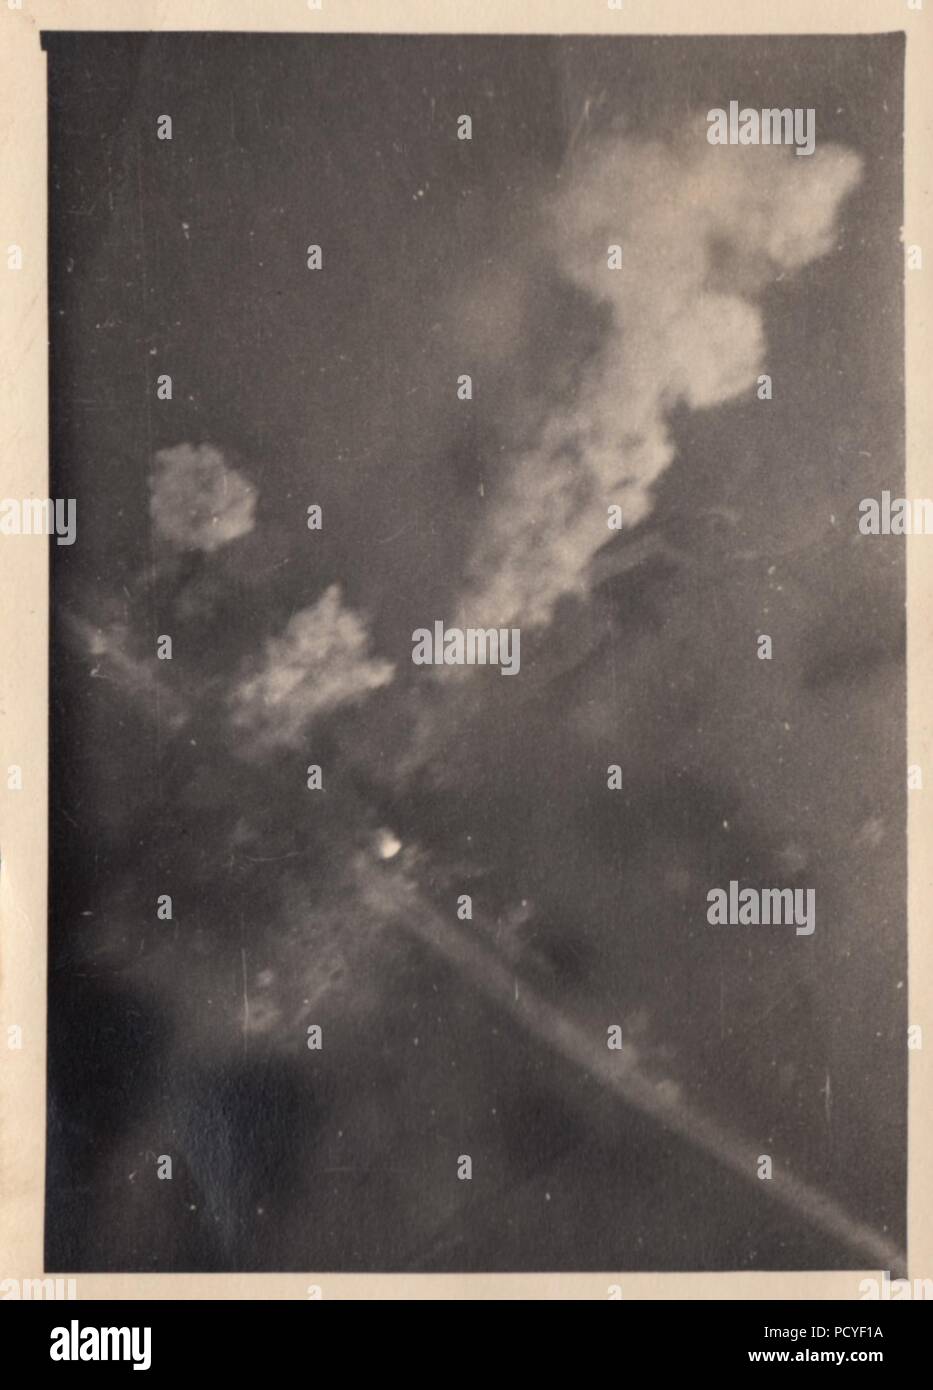 Image from the photo album of Oberfeldwebel Gotthilf Benseler of 9. Staffel, Kampfgeschwader 3: The view from a German aircraft as bombs dropped by the Dornier Do17Z-2s of 9. Staffel, Kampfgeschwader 3 explode across a French Road during the Battle of France in May 1940. Stock Photo